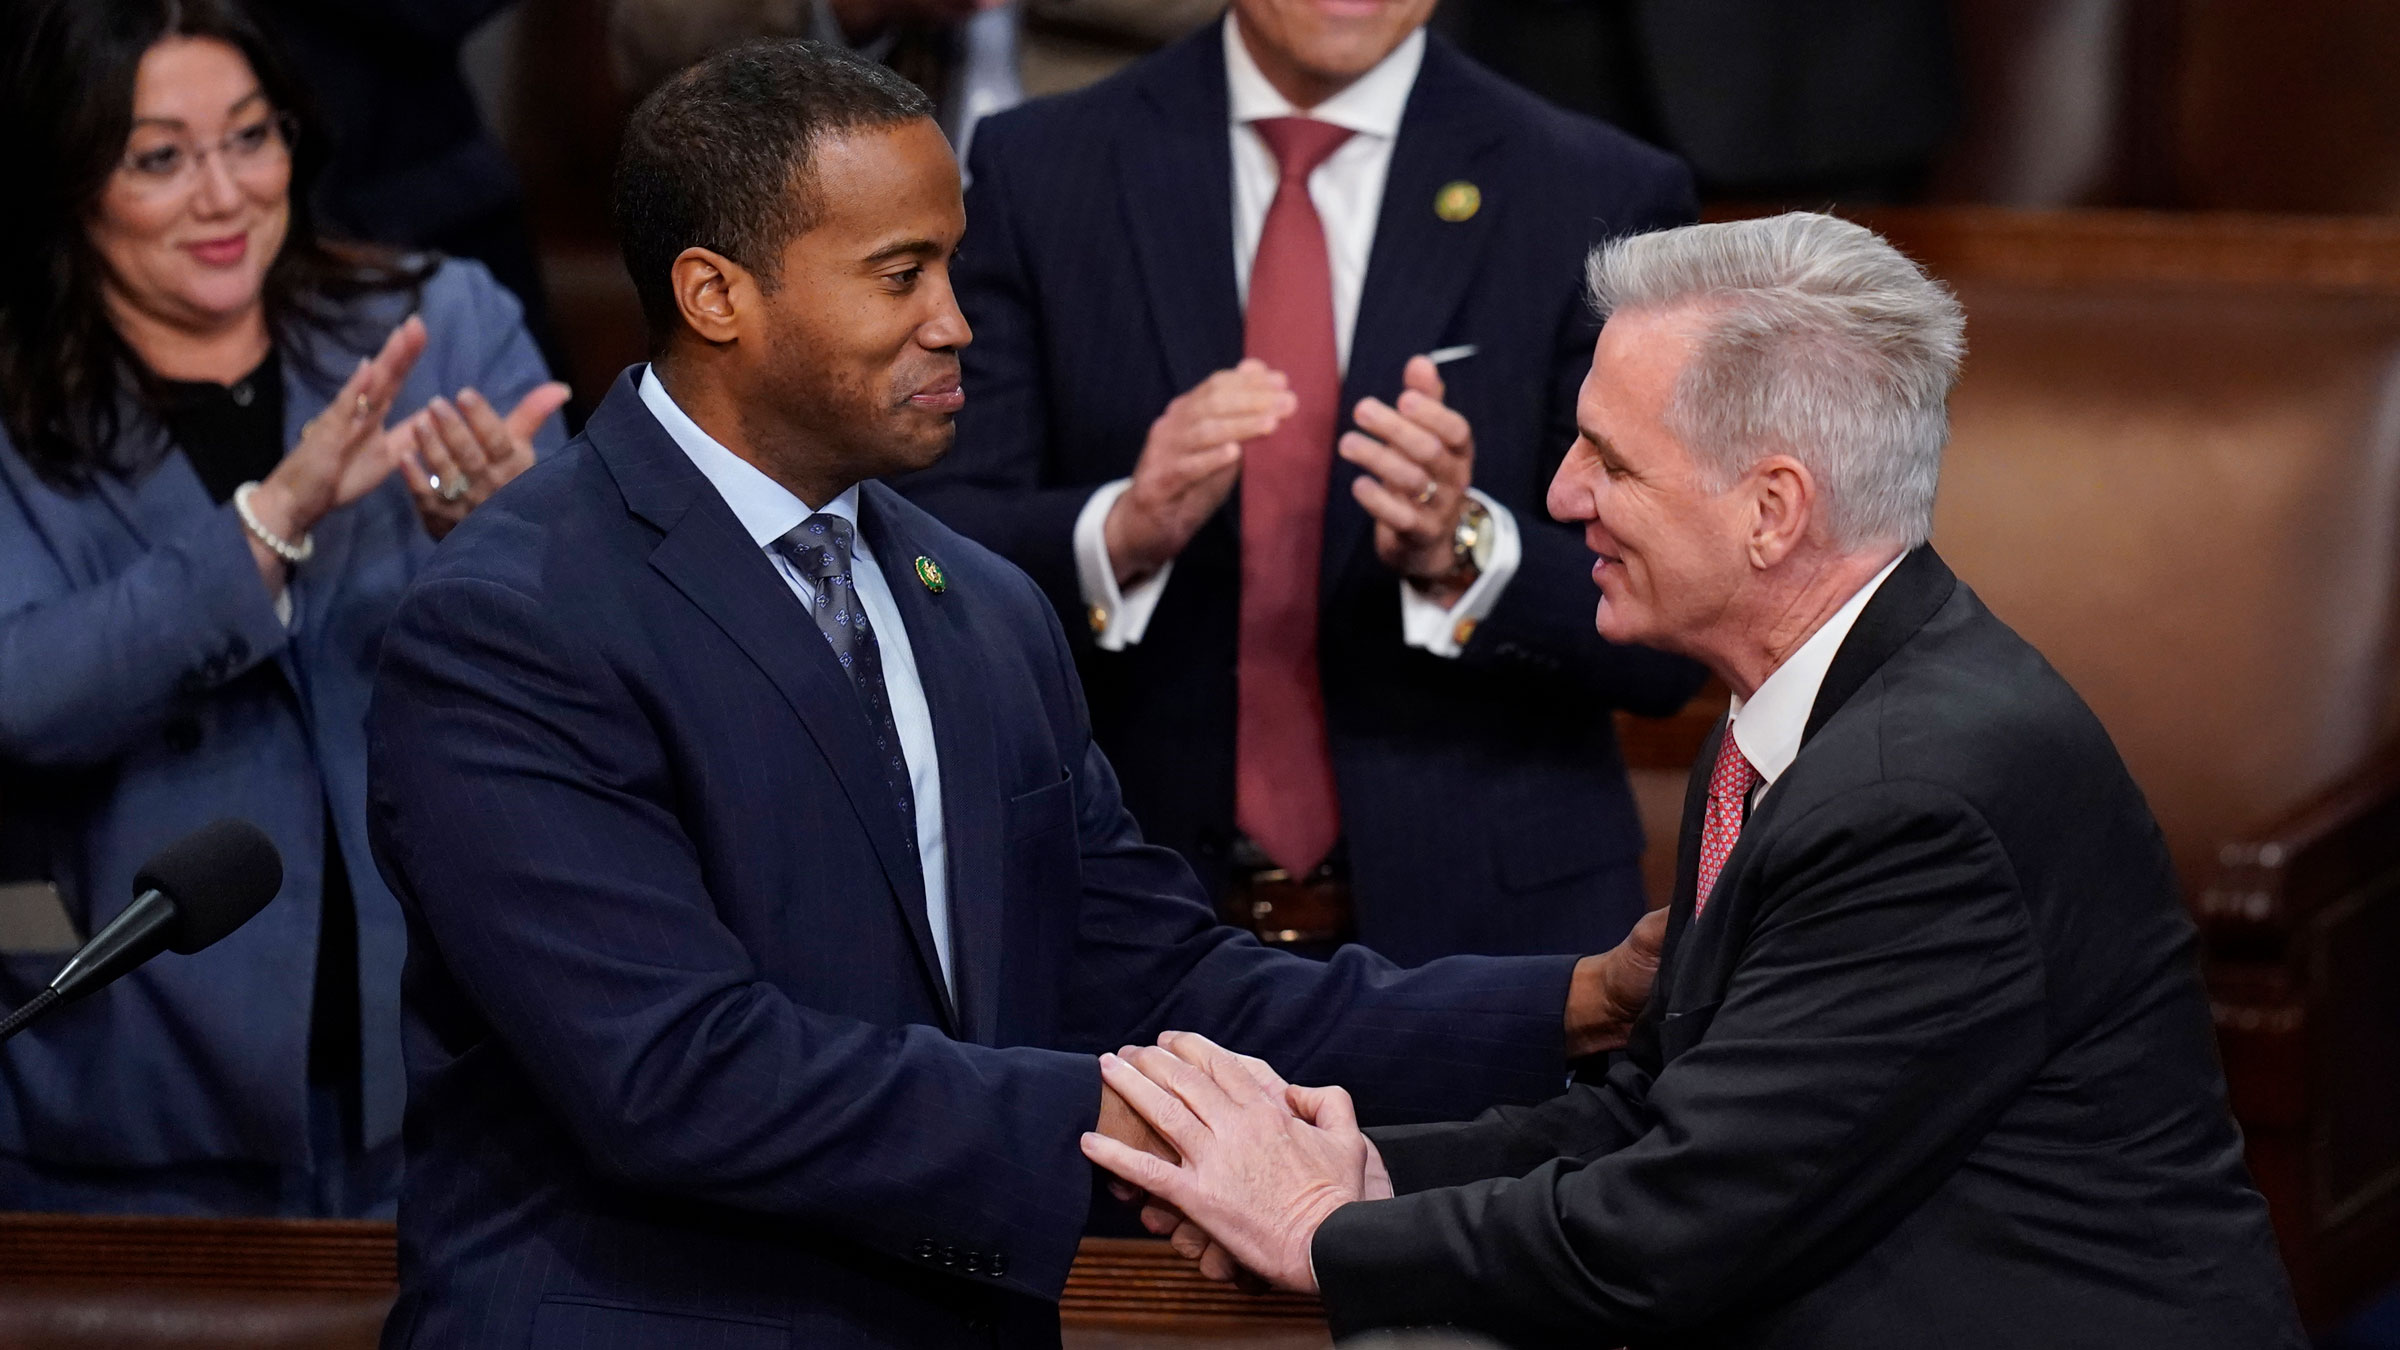 U.S. Representative-elect John James, left, shakes hands with Kevin McCarthy after nominating him for president on Thursday.